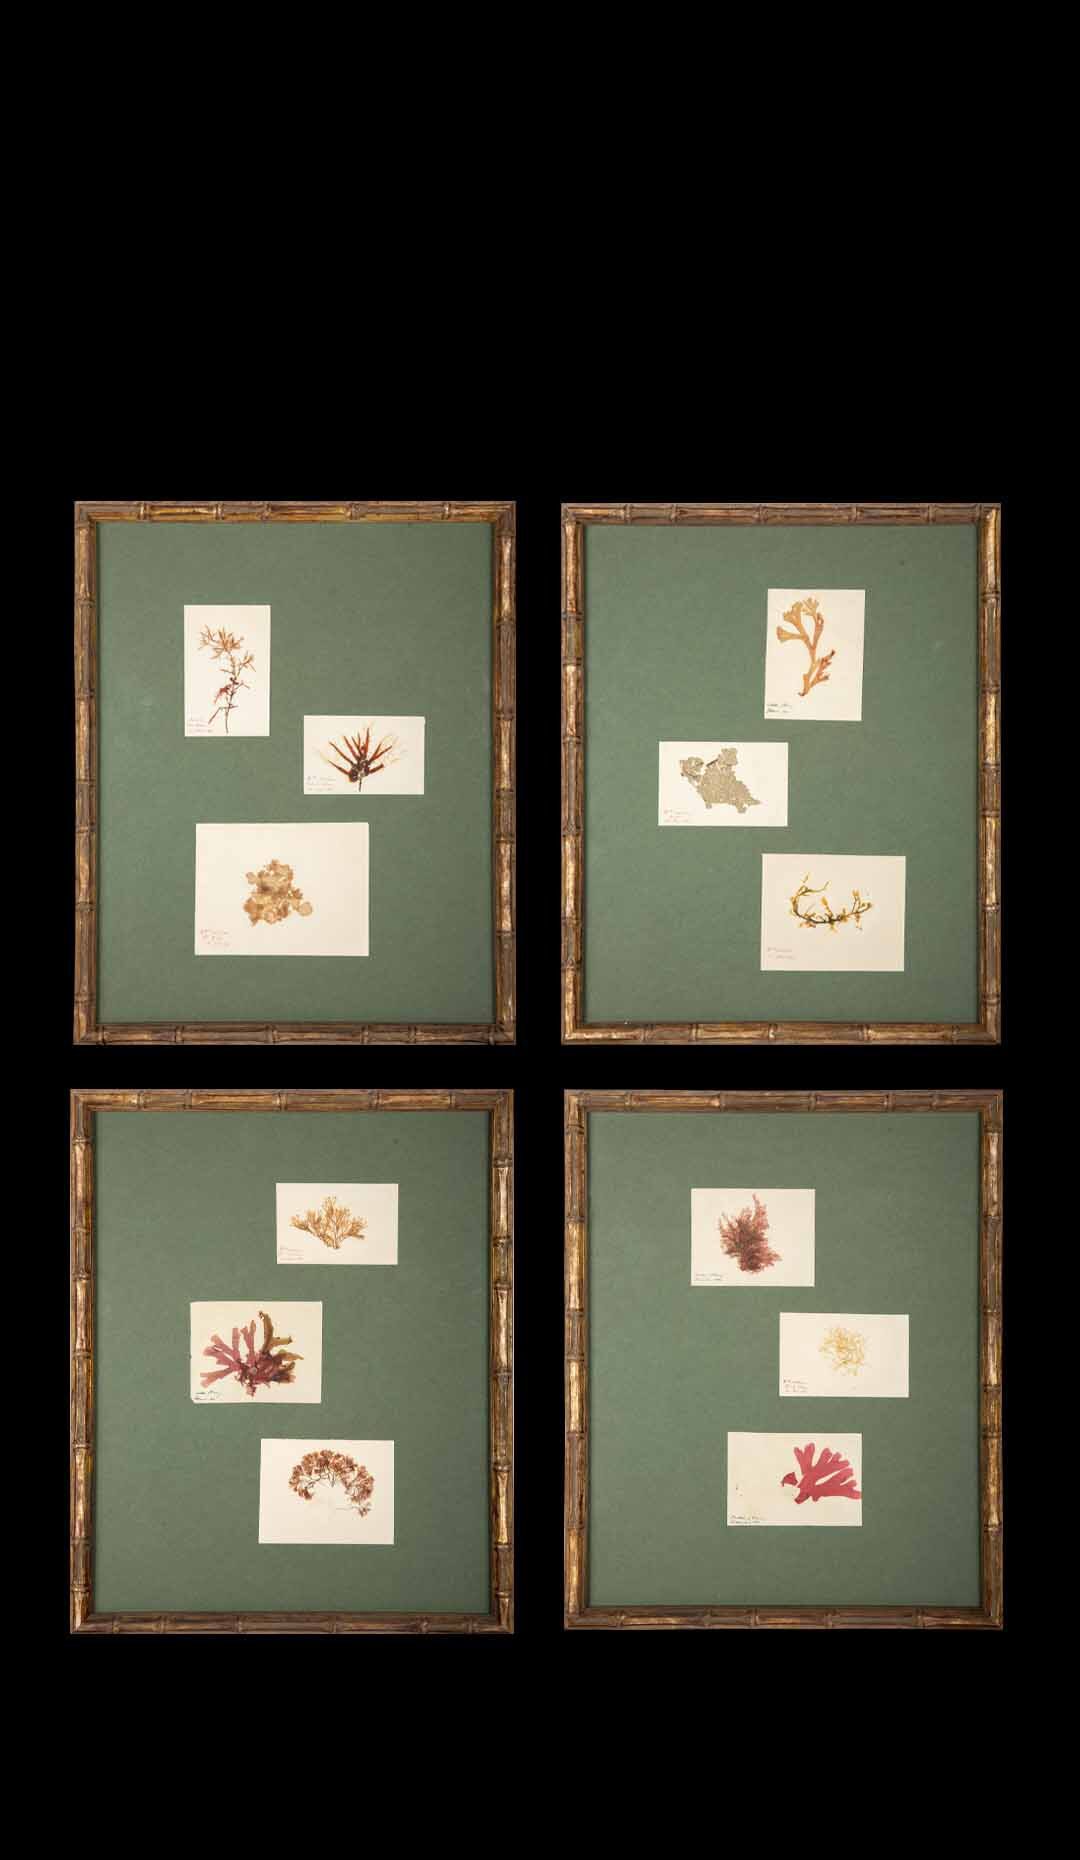 Framed and Pressed French Alguier Specimens from the 19th Century